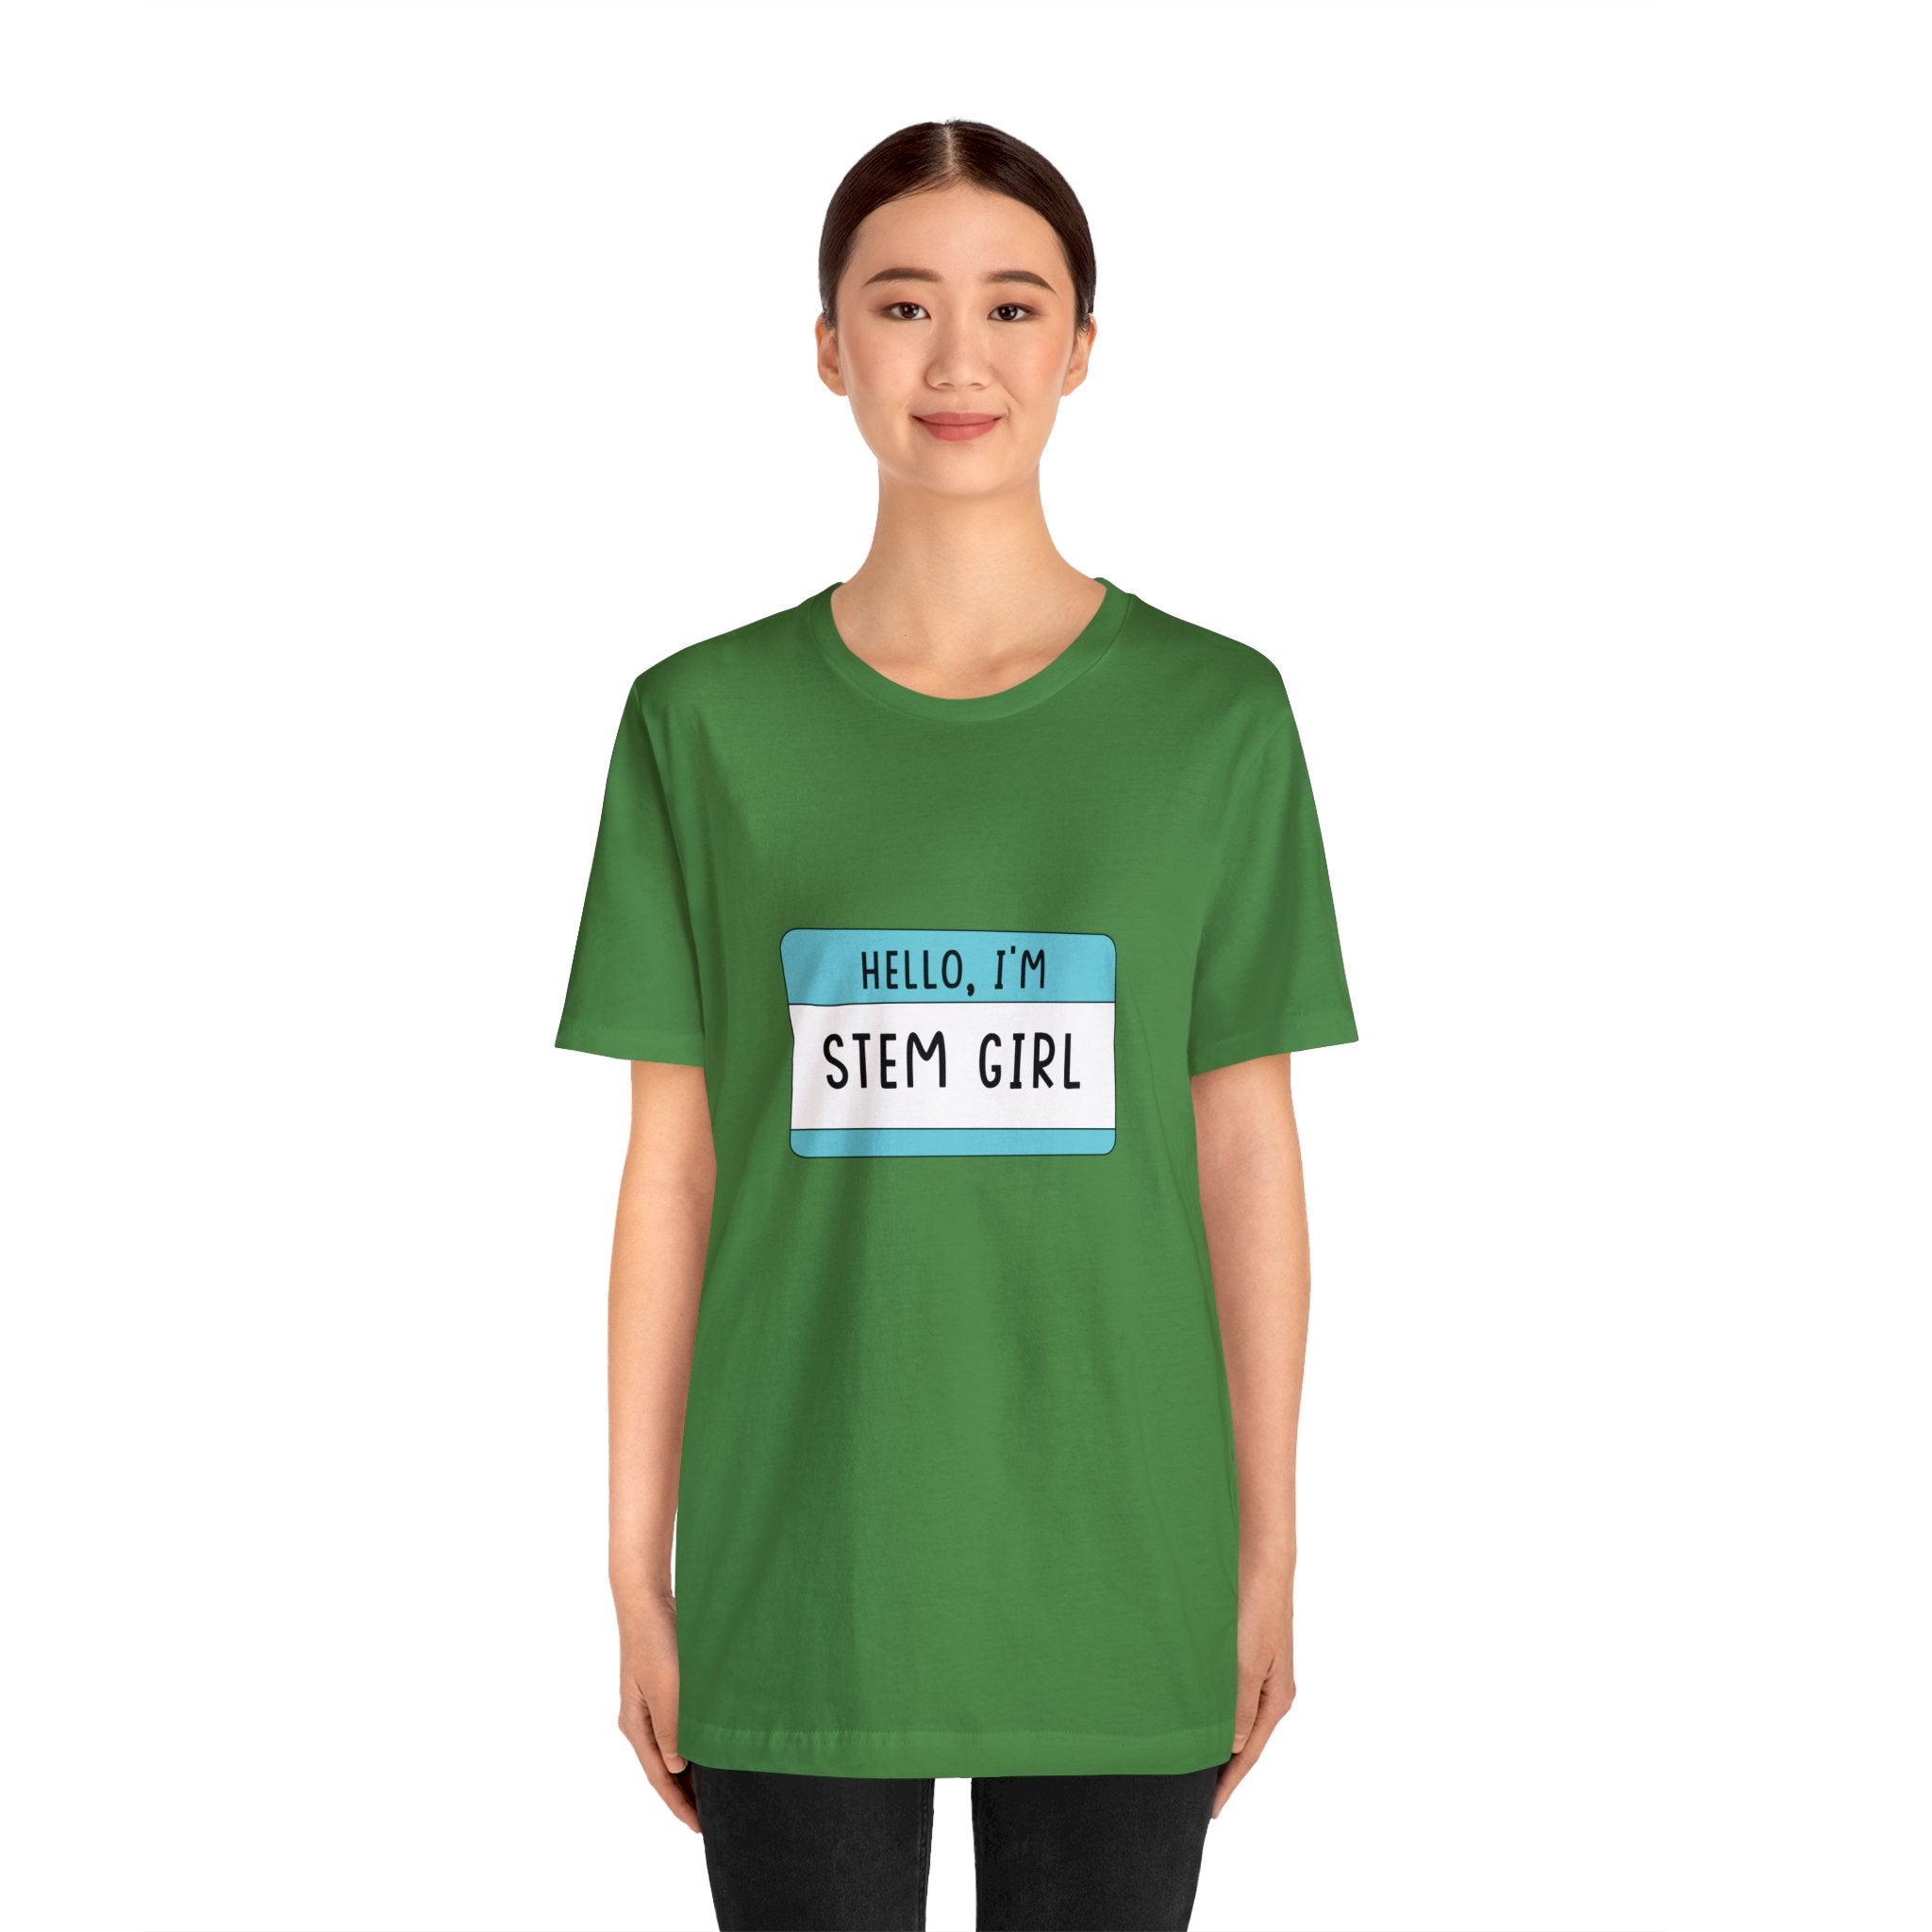 Young woman in a green Hello, I'm Stem Girl T-Shirt, standing against a white background.